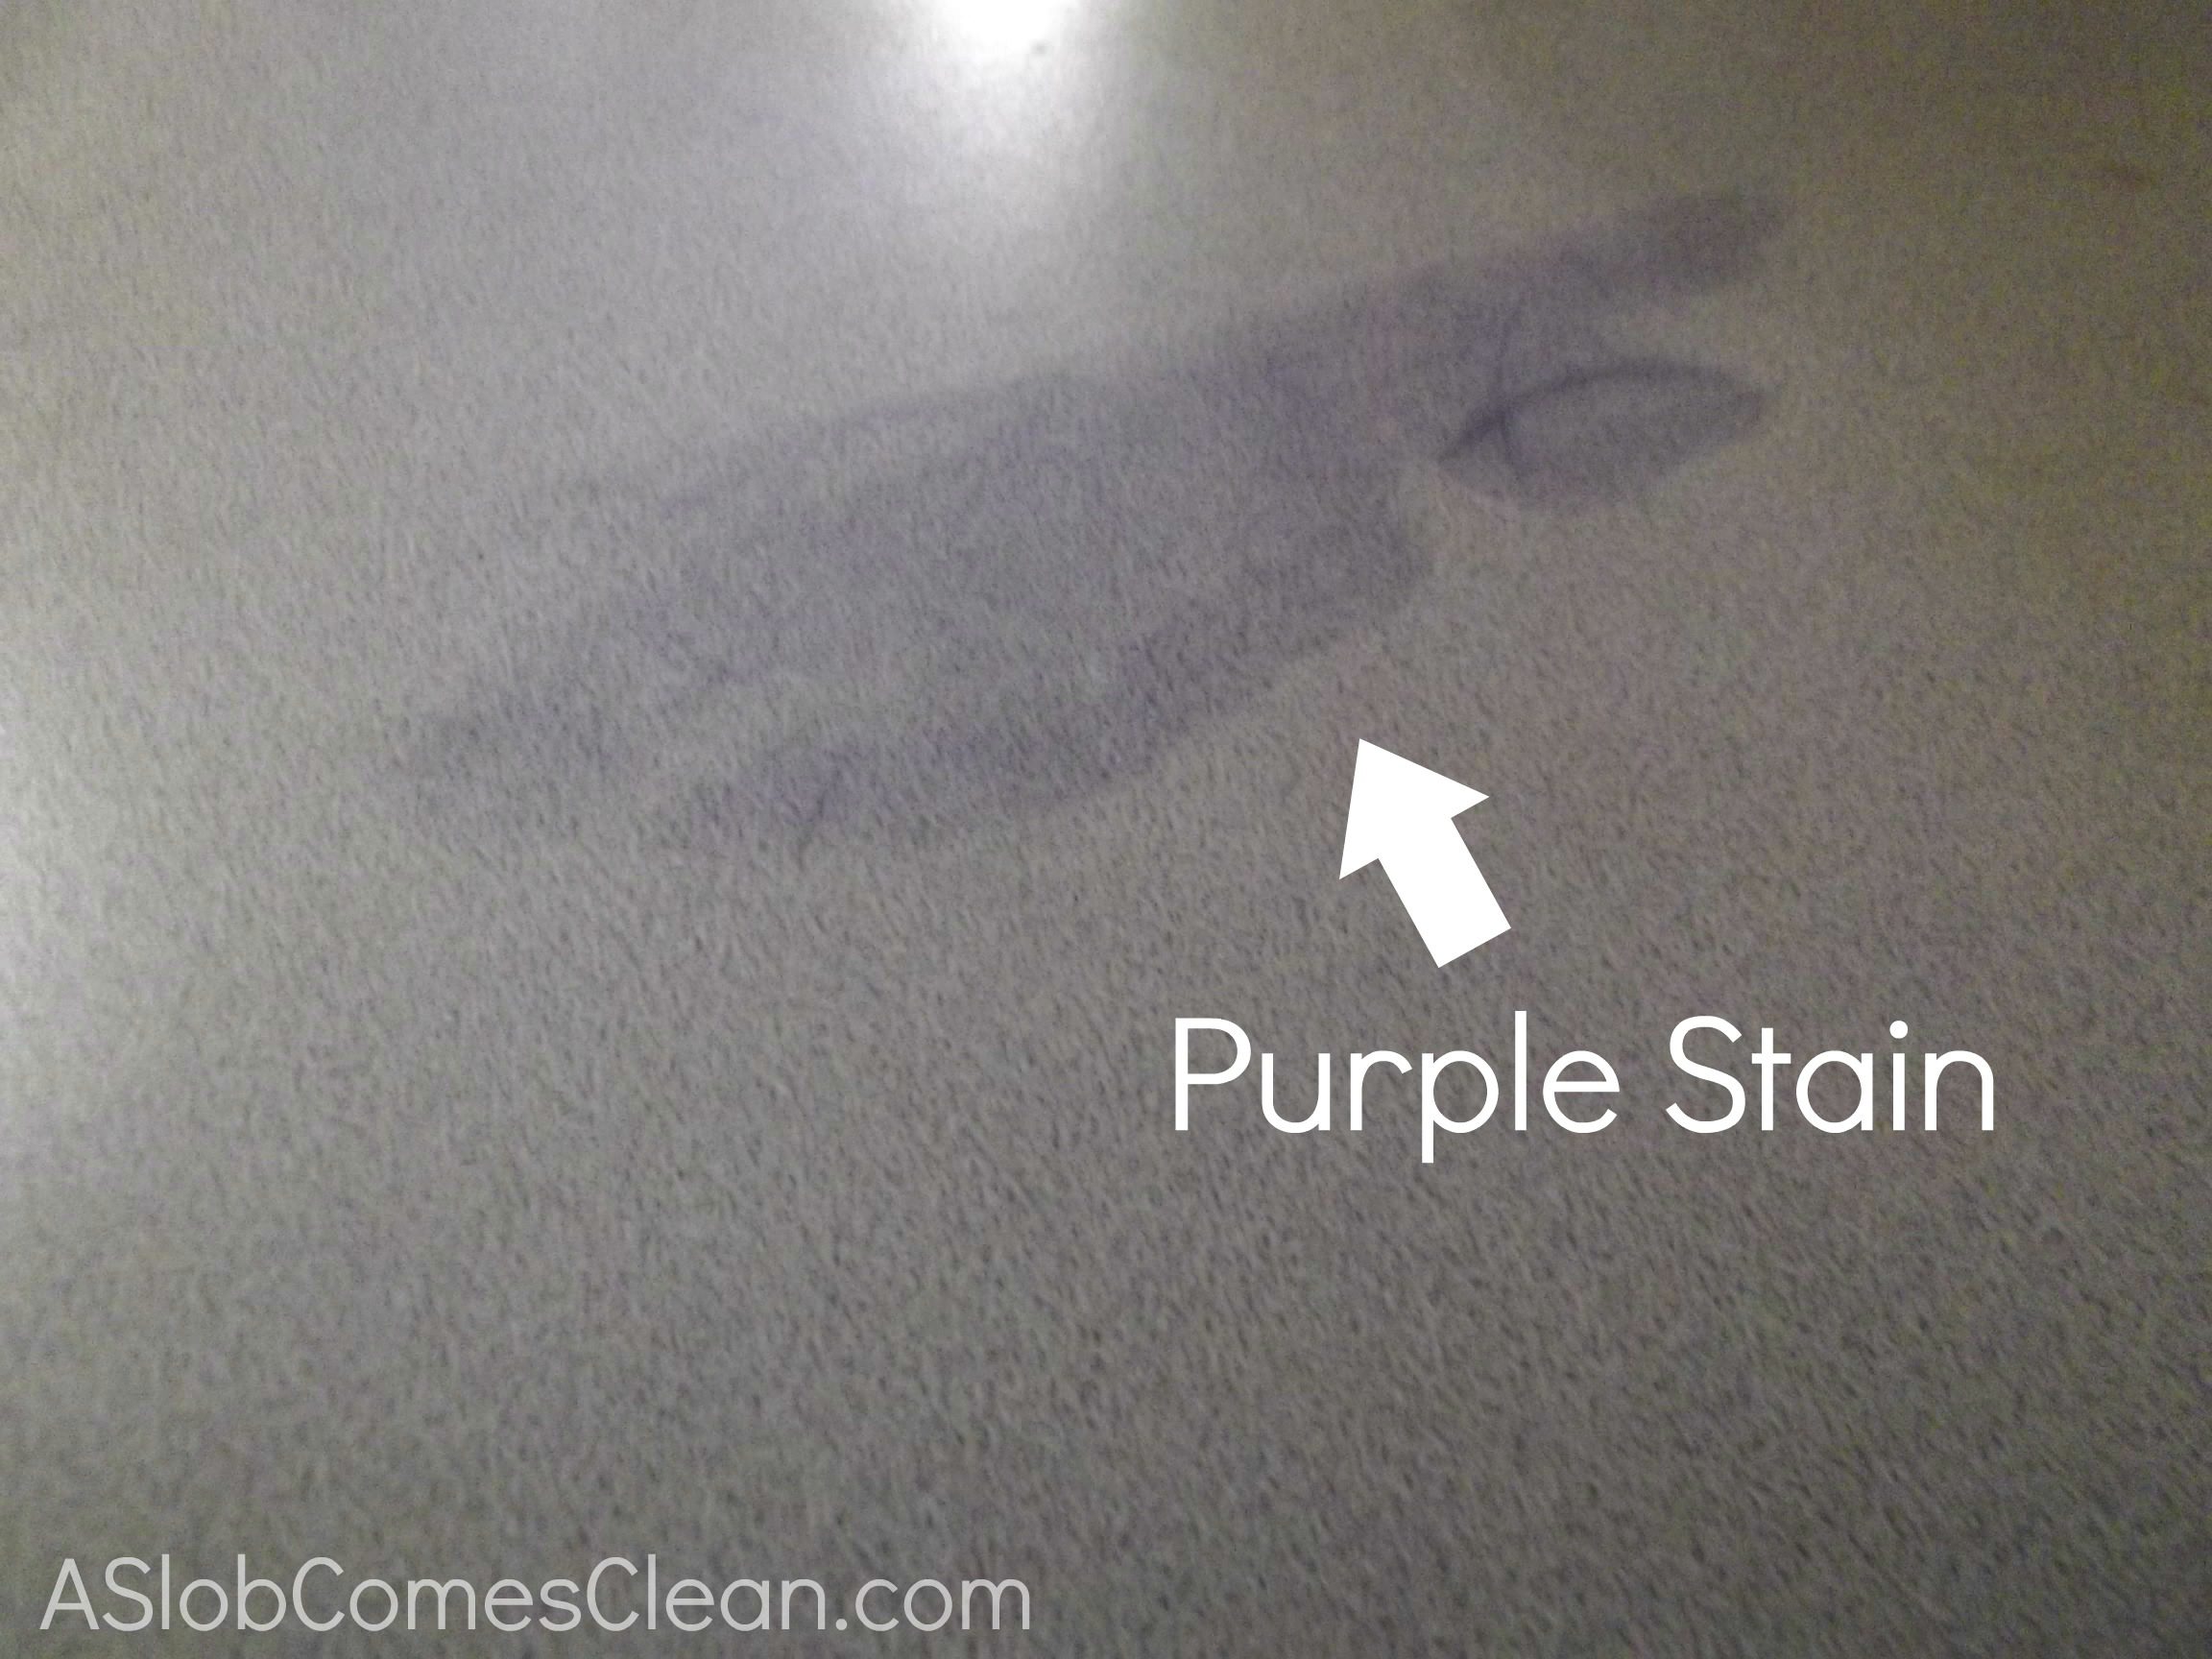 Purple stain on kitchen counter top